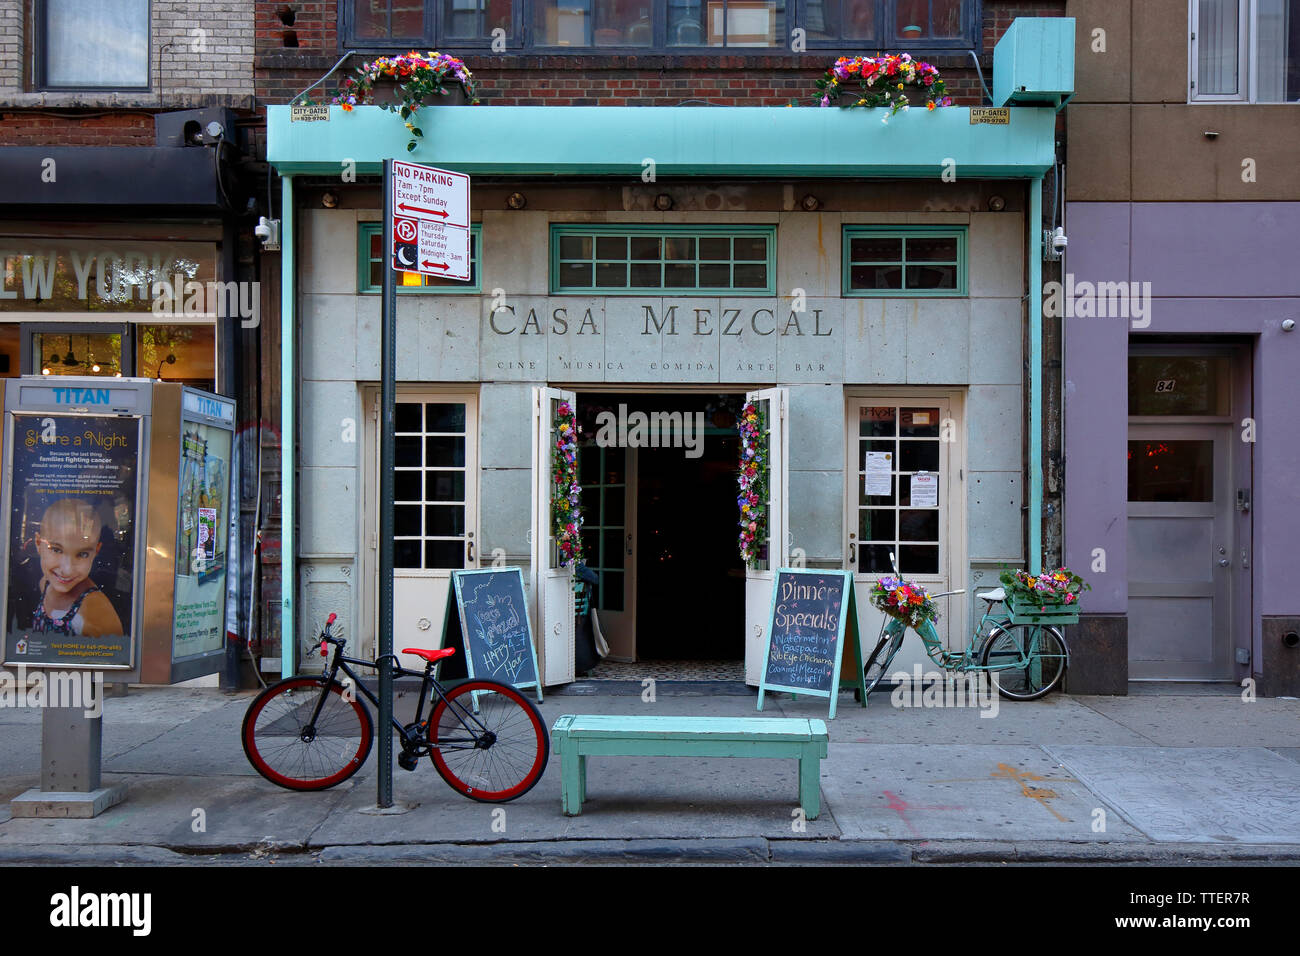 Casa Mezcal, 86 Orchard Street, New York, NY. exterior storefront of a bar and restaurant in the Lower East Side neighborhood of Manhattan. Stock Photo